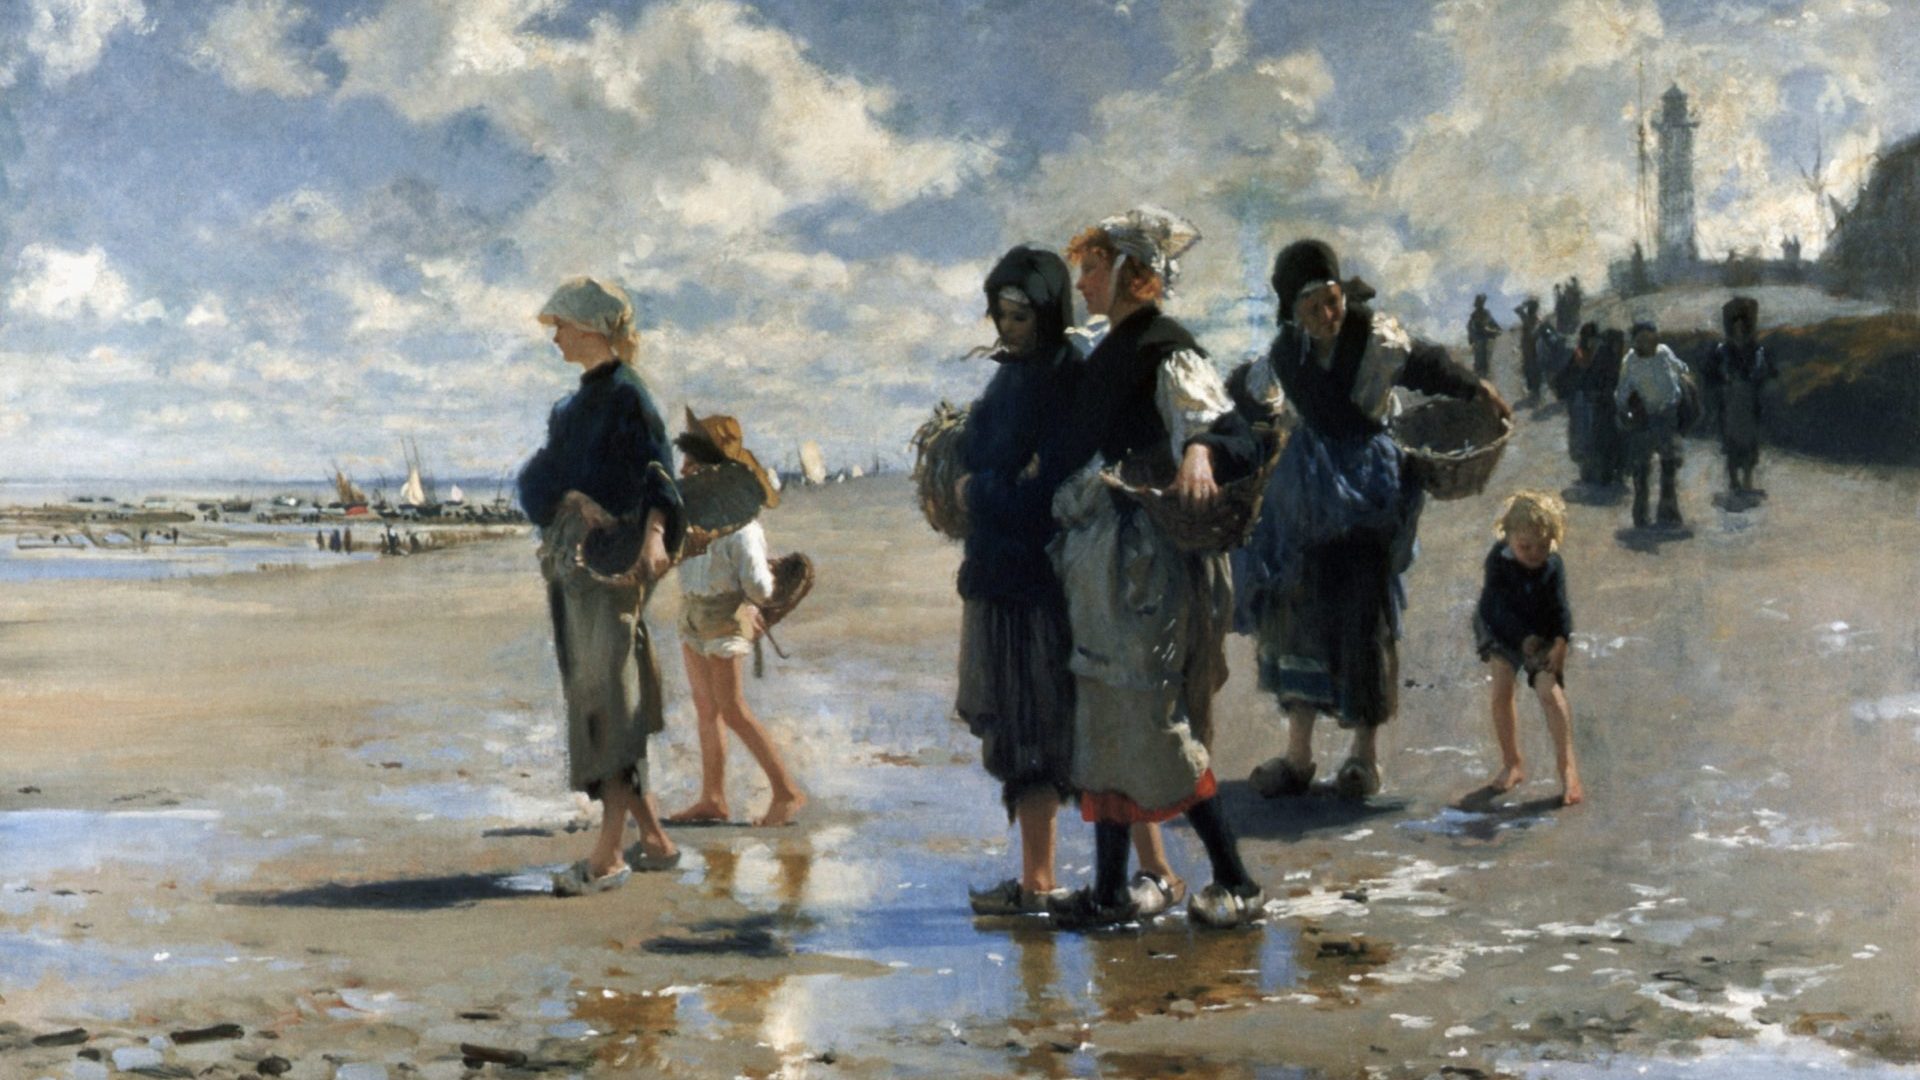 The vast expanse of a beach in Brittany: The Oyster Gatherers of Cancale by John Singer Sargent. Photo: Francis G Mayer/Corbis/VCG